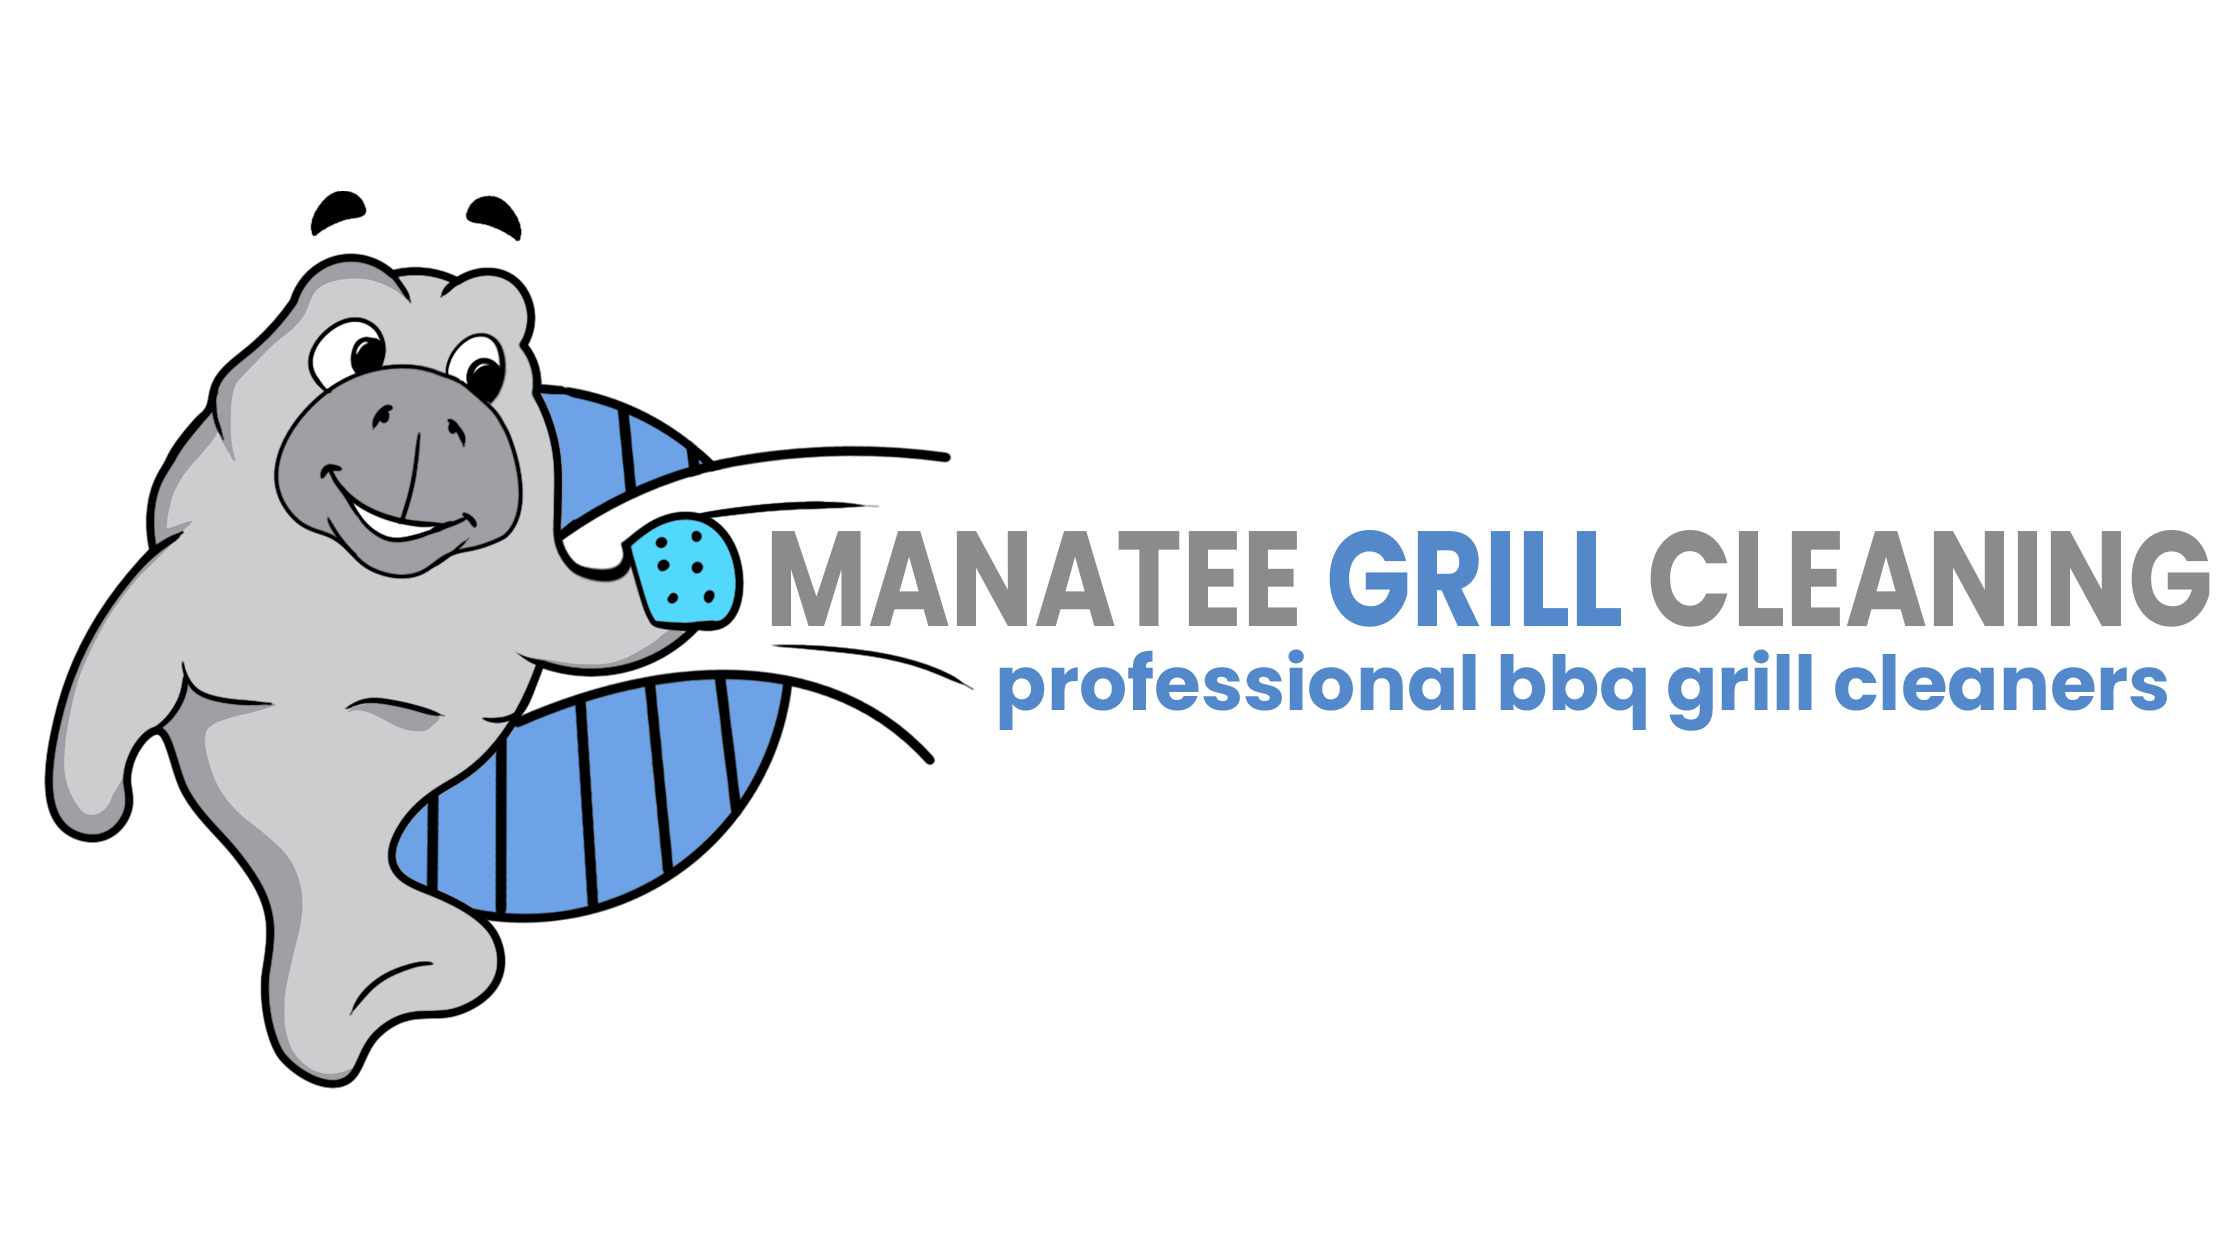 https://manateegrillcleaning.com/wp-content/uploads/2020/04/manatee-grill-cleaning-1.png